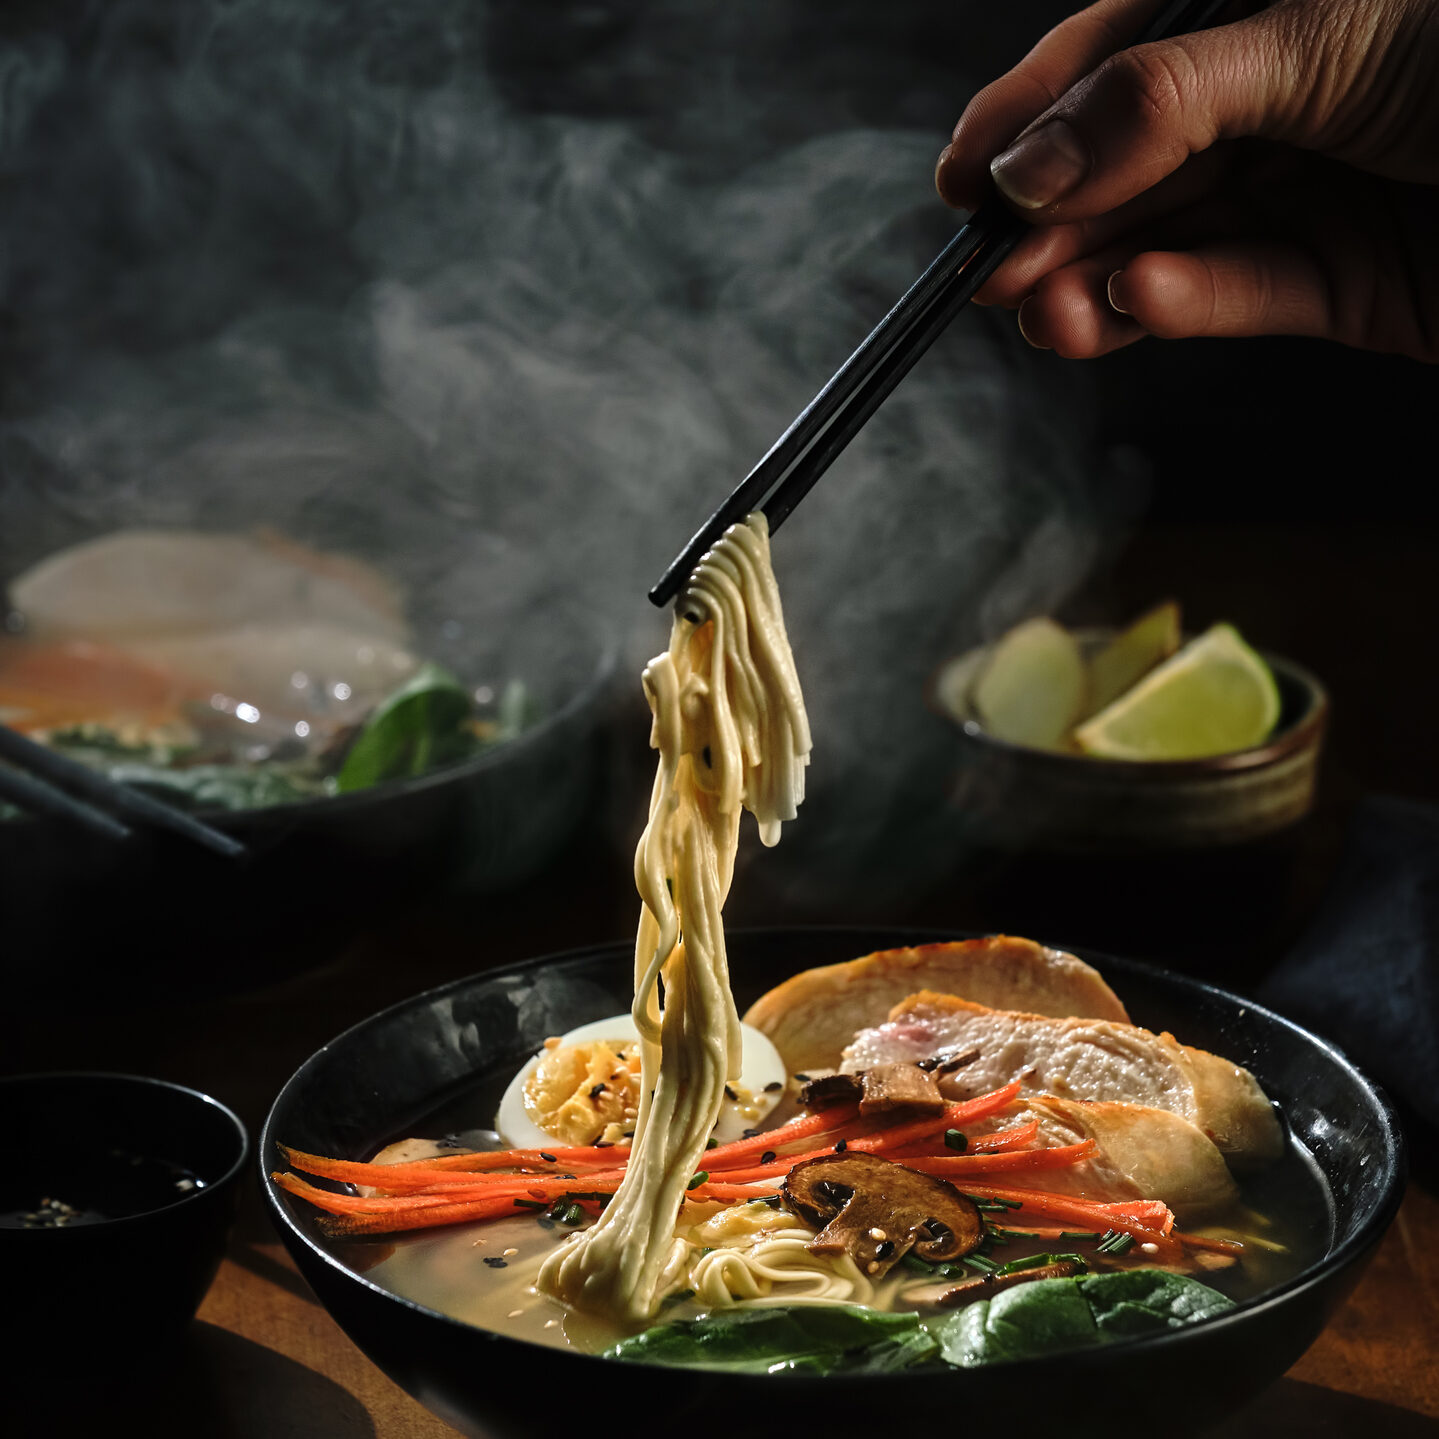 Hand with chopsticks takes noodles of ramen soup. Traditional Asian cuisine.